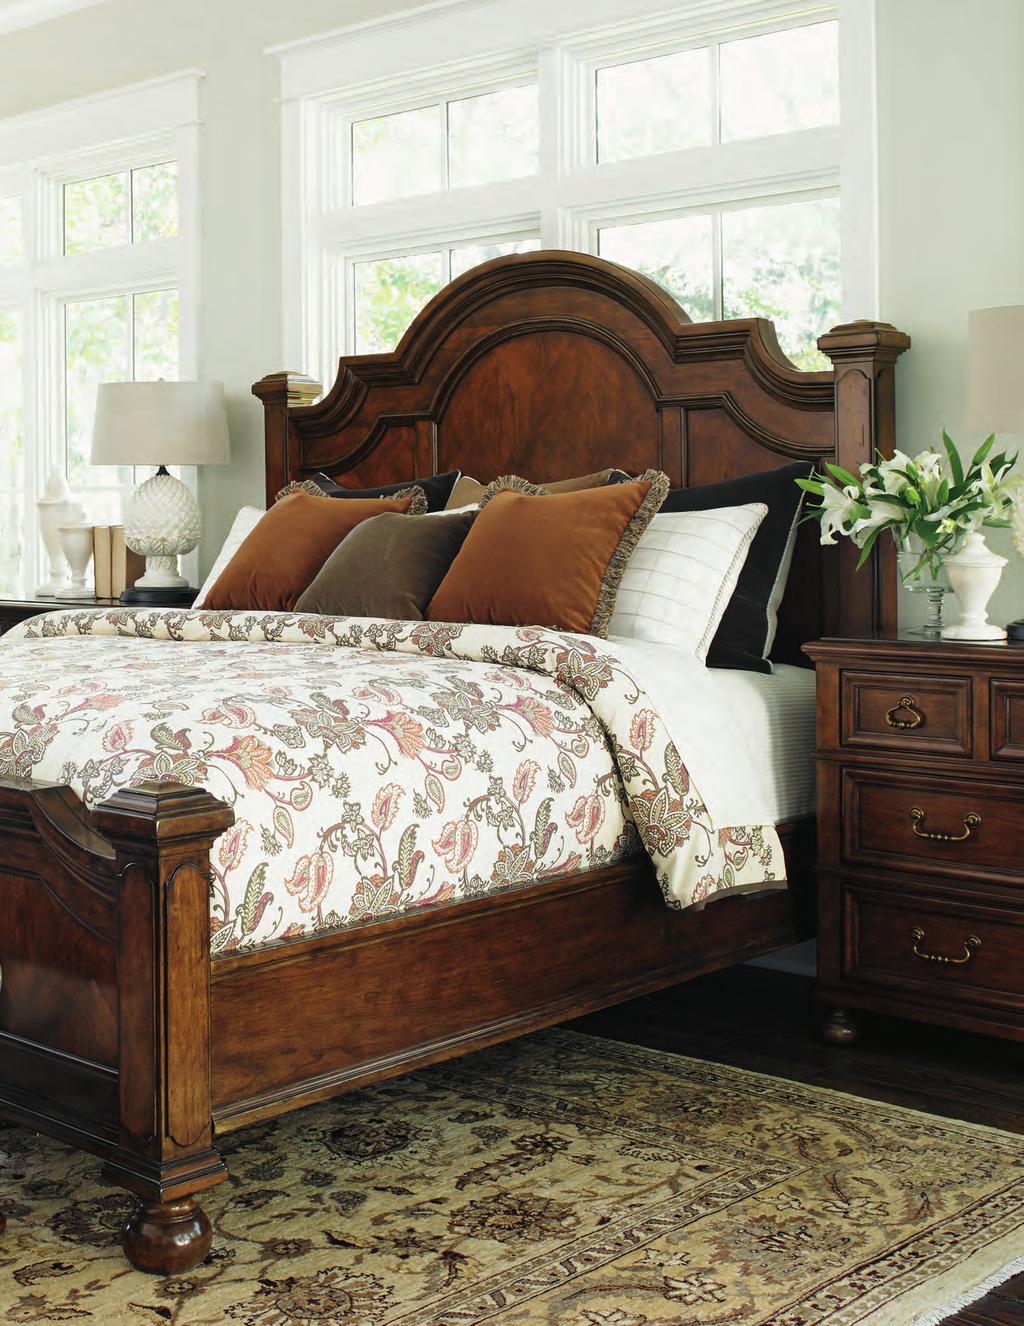 The design features distinctive moldings on the crown and bedposts, with finished